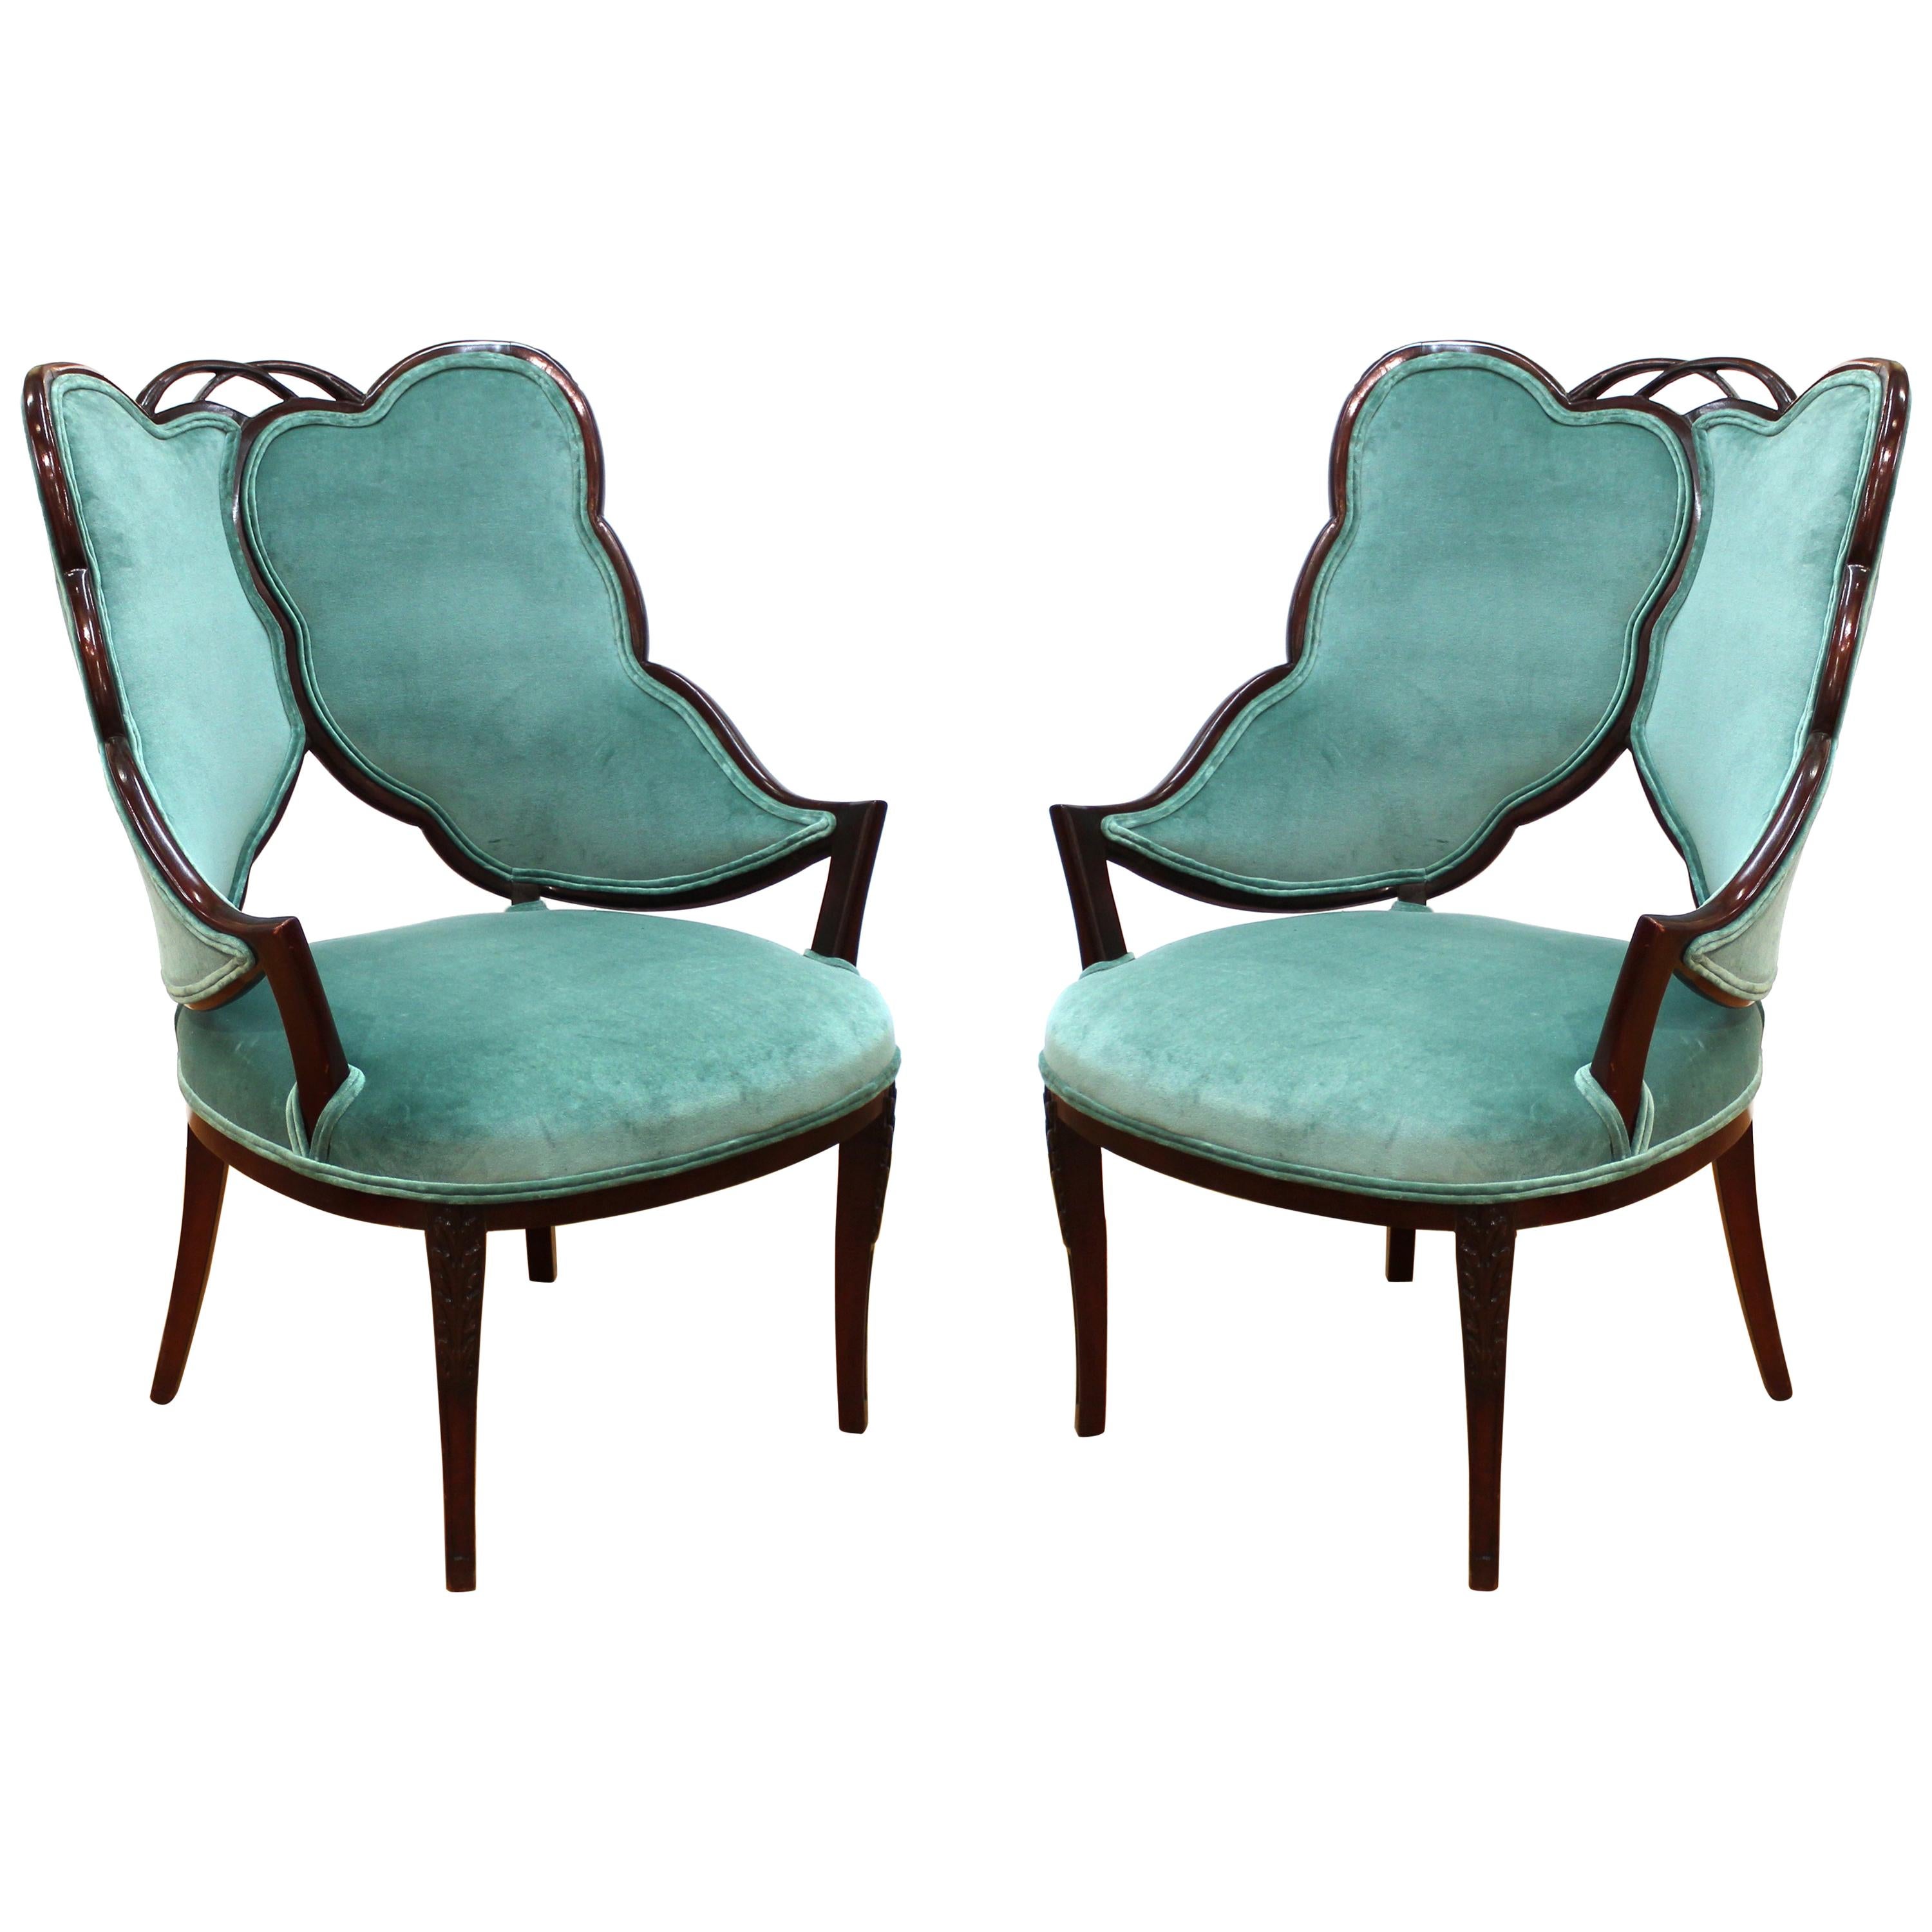 French Art Deco Mahogany Chairs in Jade Green Velvet with Leaf Design